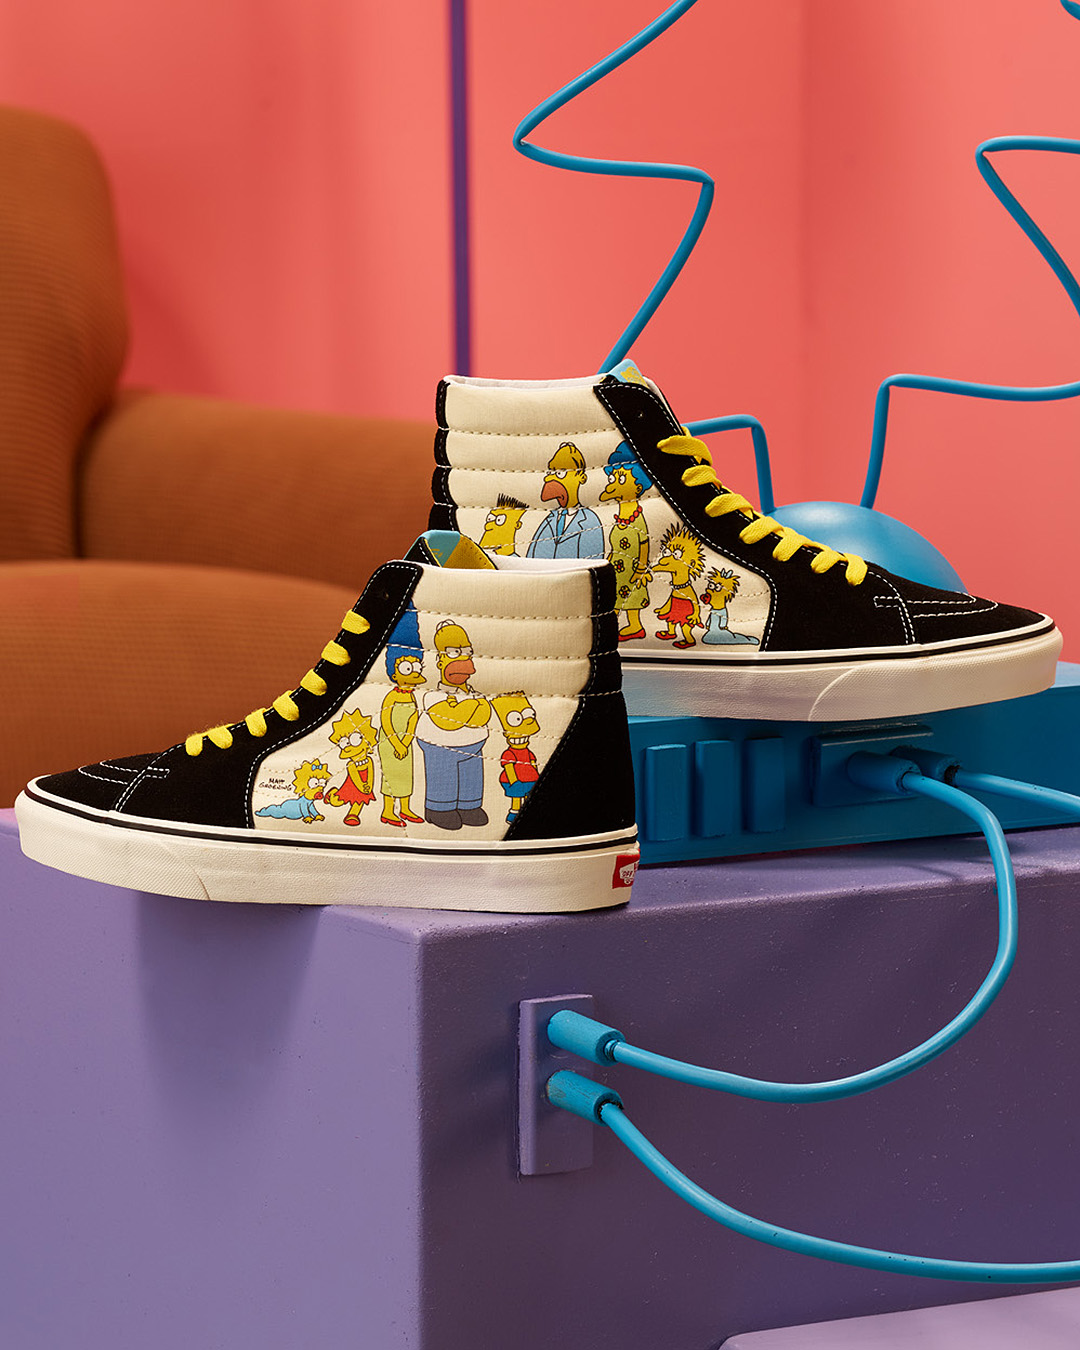 Sk8-Hi tops from Vans x Simpsons featuring old and new school Simpsons characters.